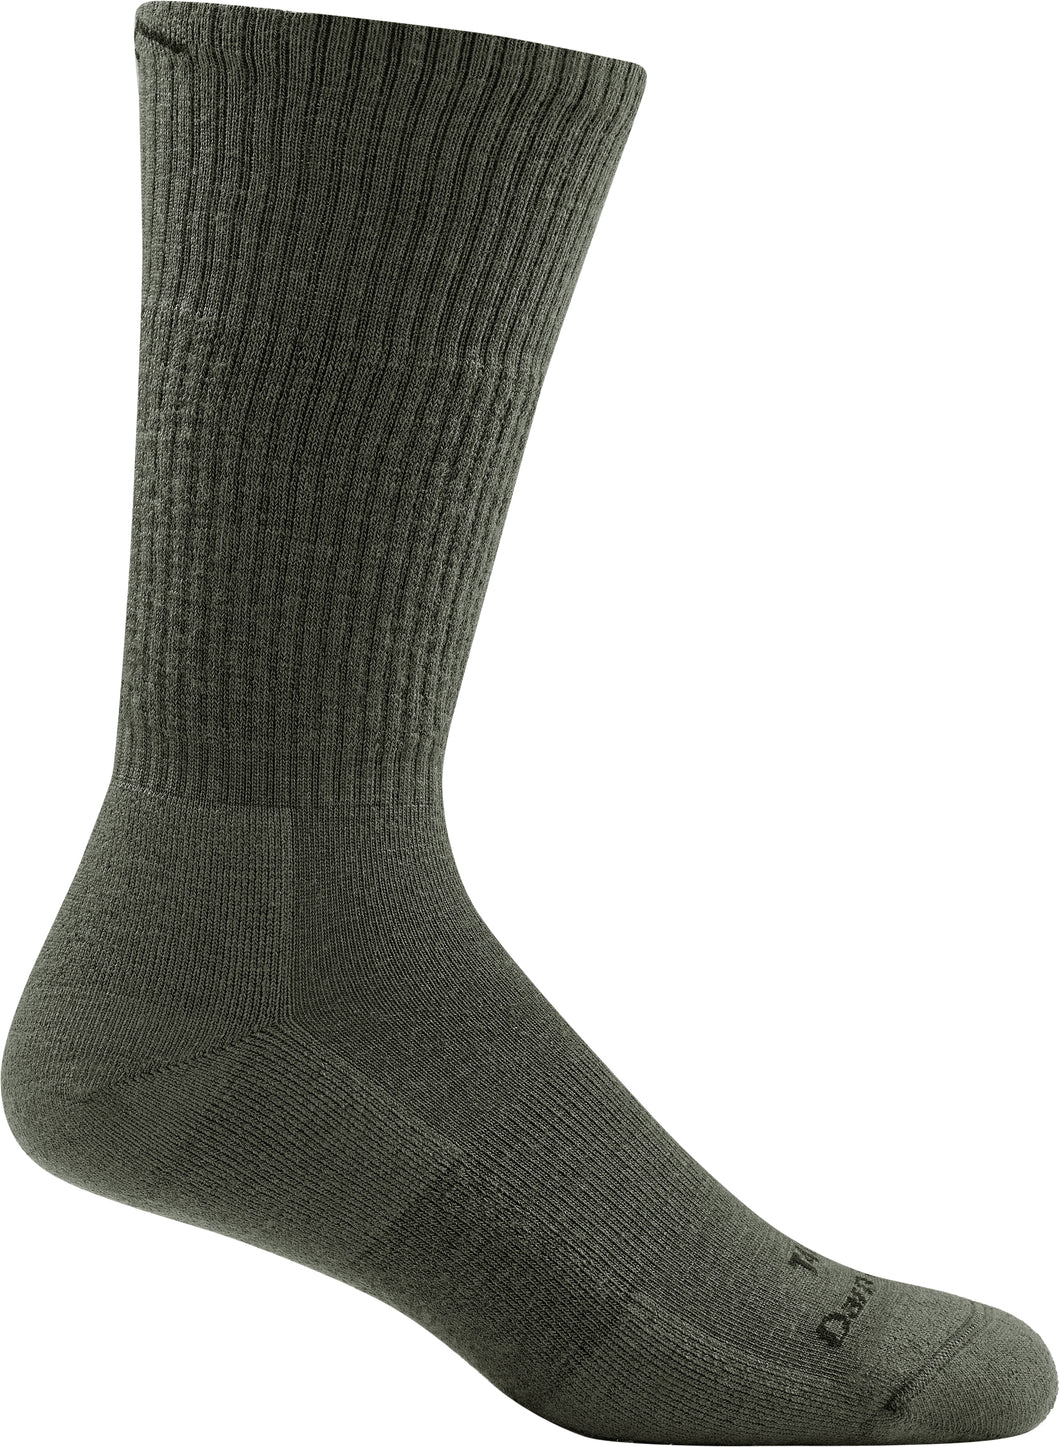 Darn Tough T4021 Tactical Series Merino Wool Midweight Boot Socks with Cushion